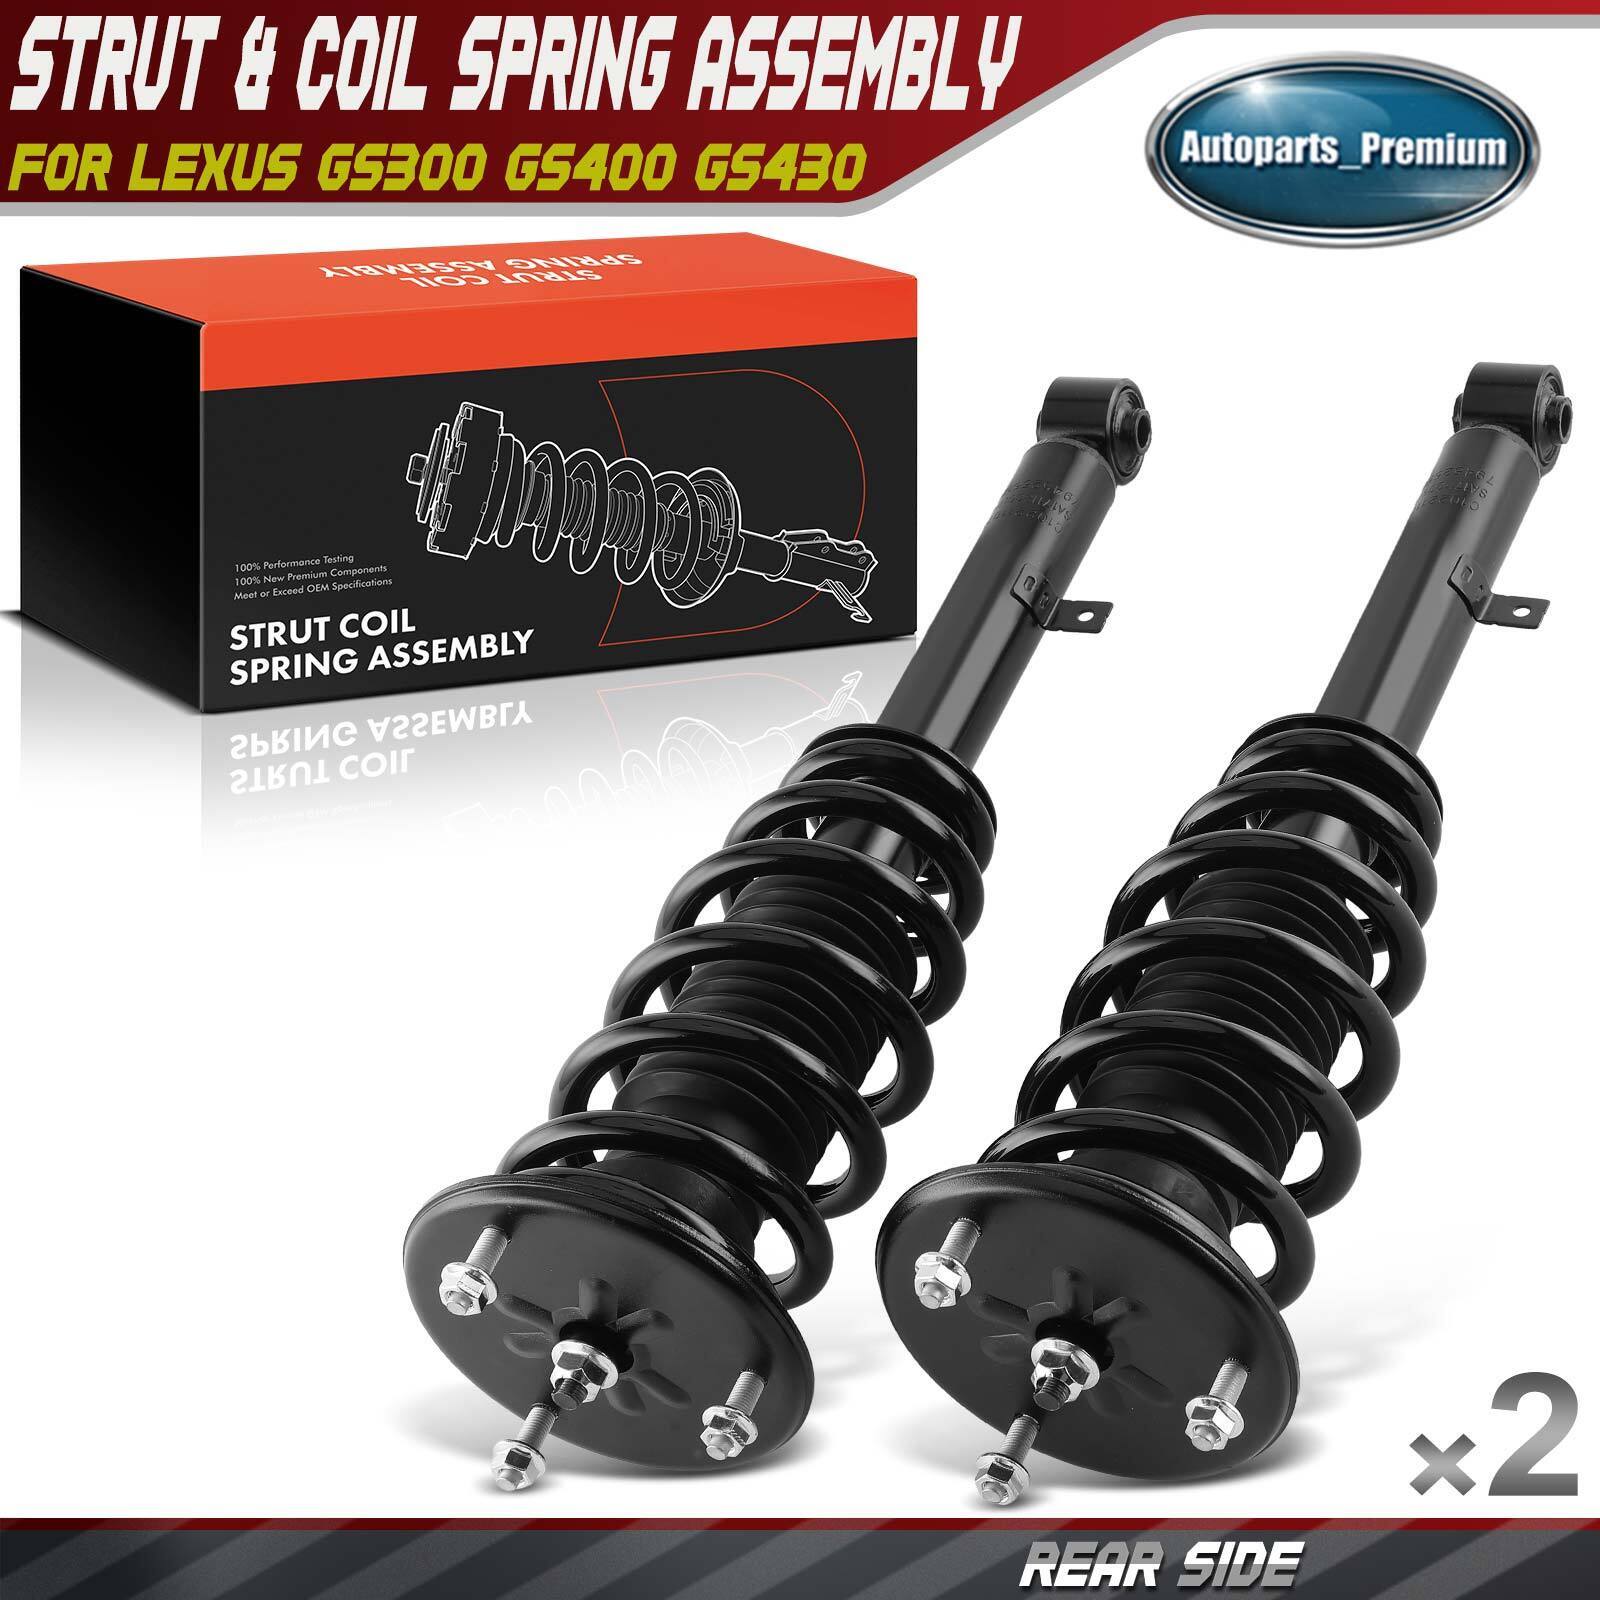 2x Front Complete Strut & Coil Spring Assembly for Lexus GS300 98-05 GS400 GS430